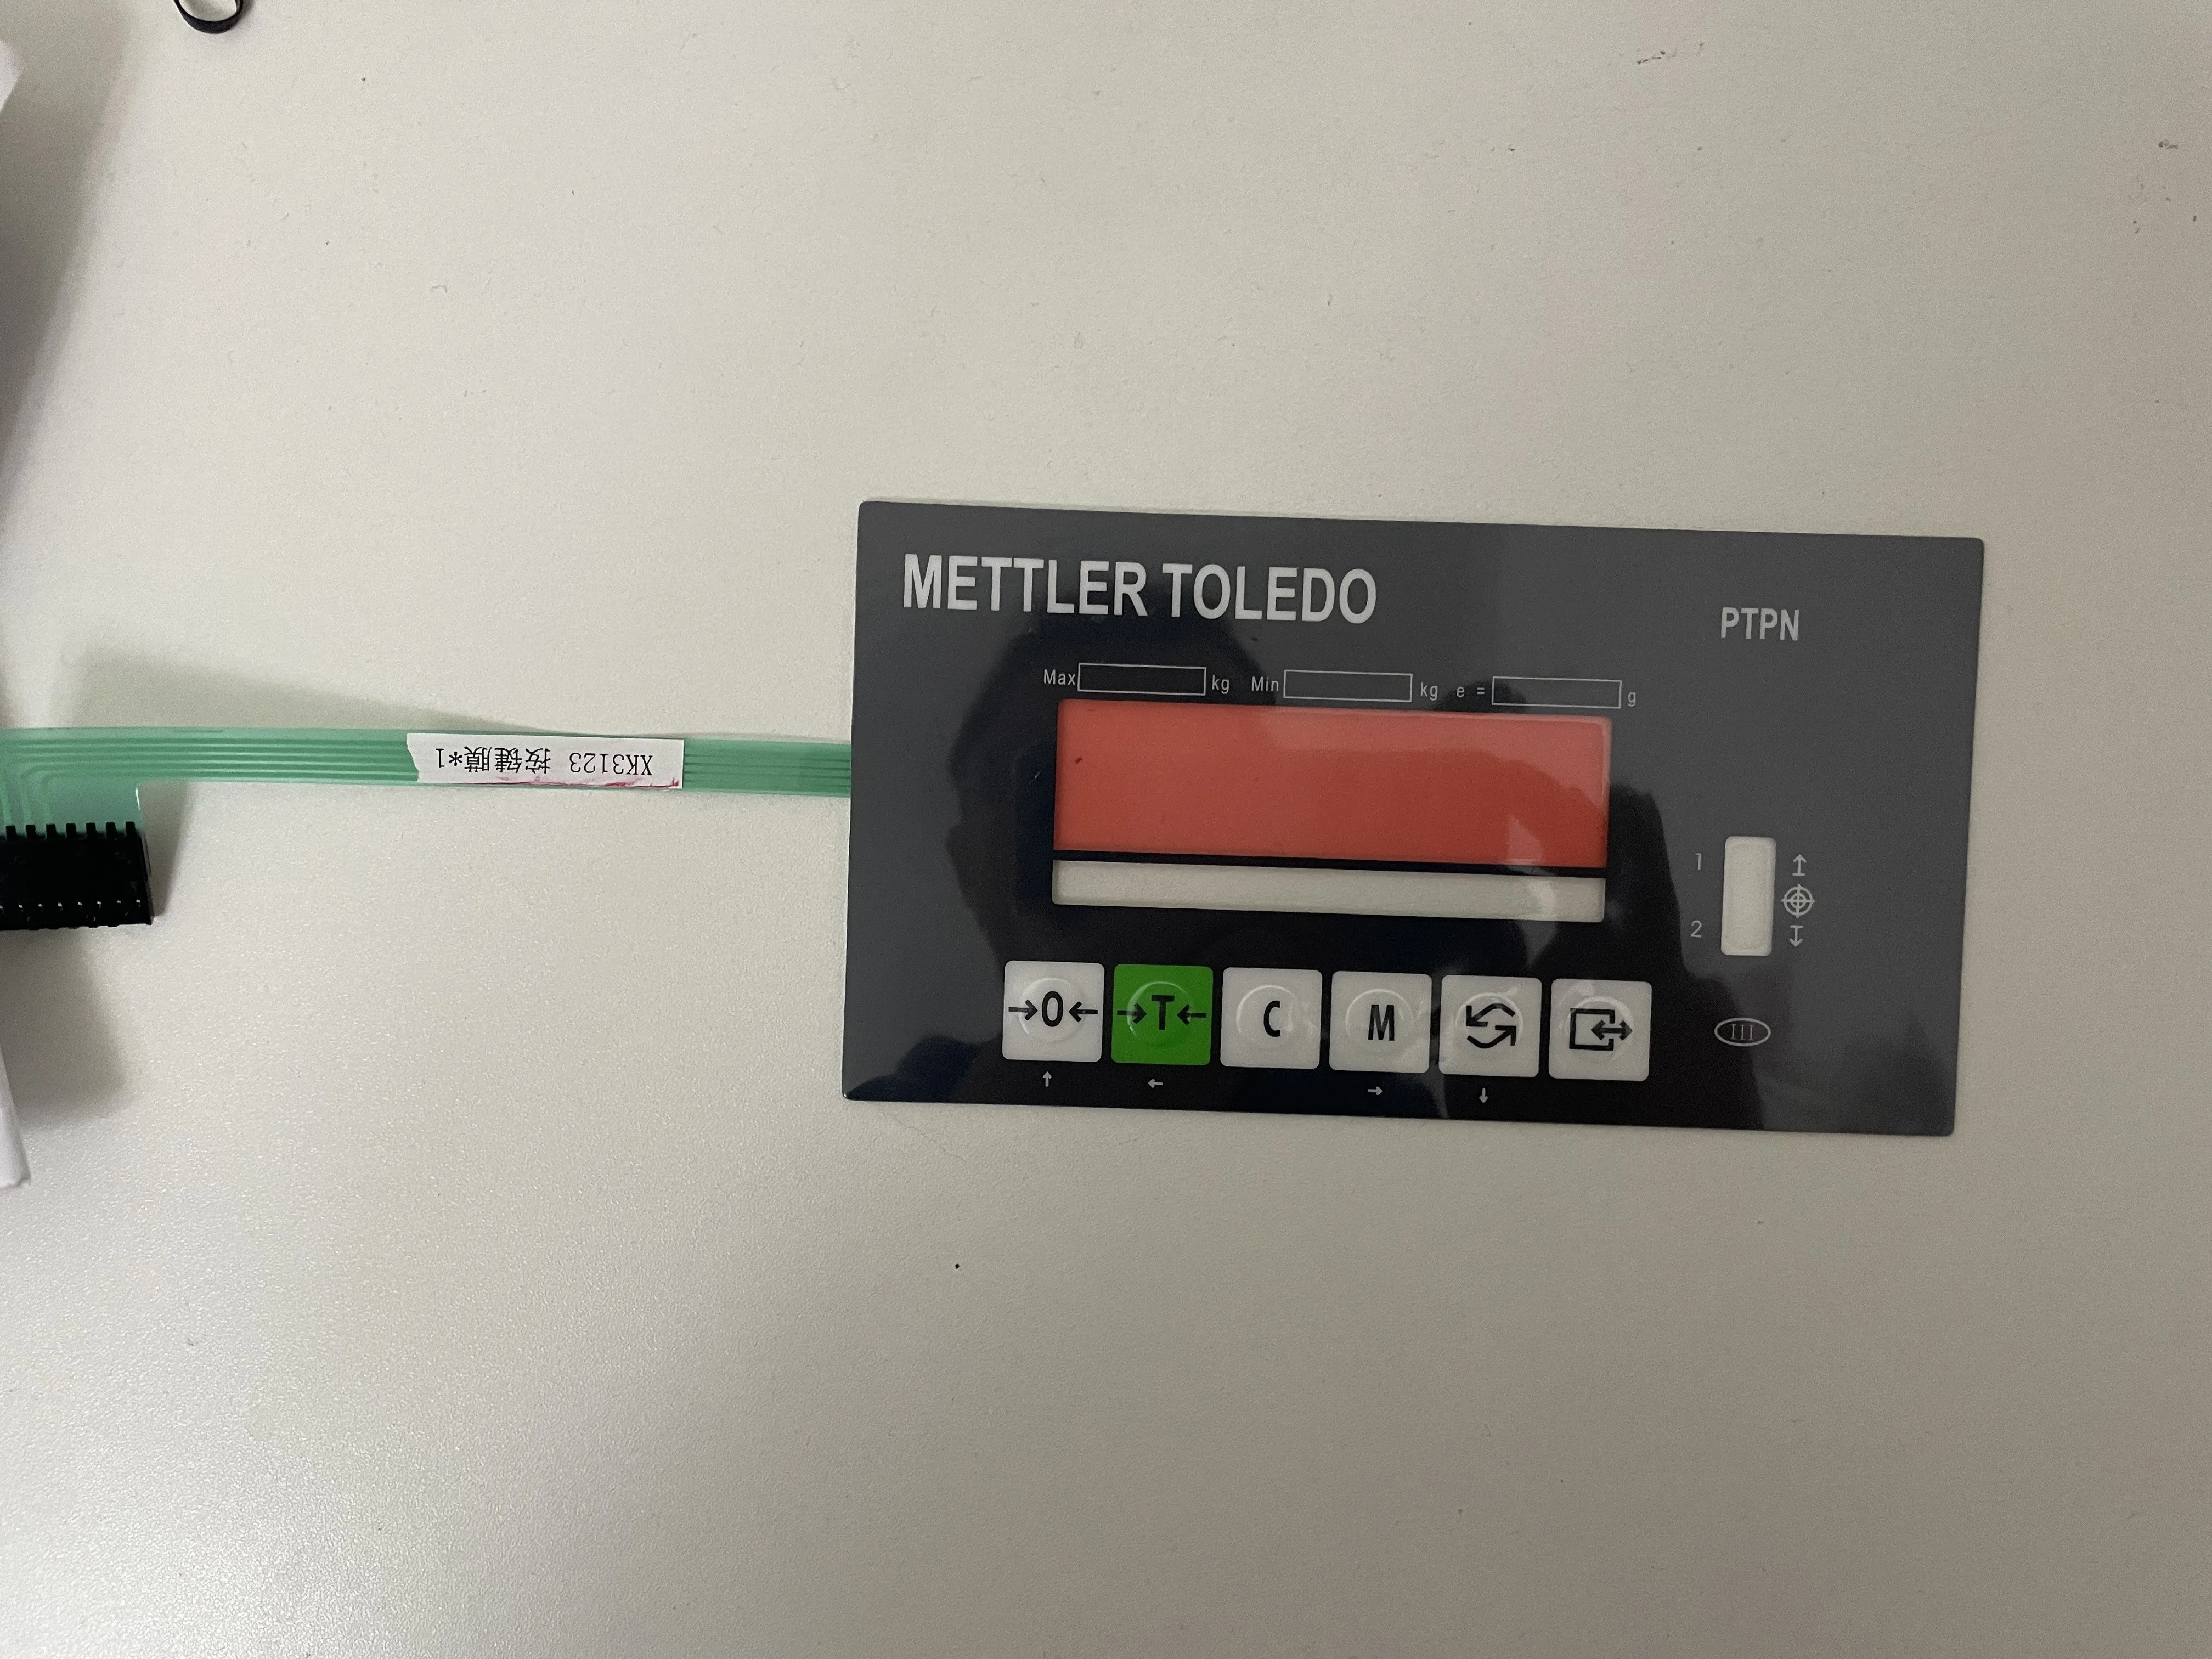 New Replacement Touch Membrane Keypad for METTLER TOLEDO Weighing Indicator IND320L XK3123 PTPN-1800-023 PANTHER